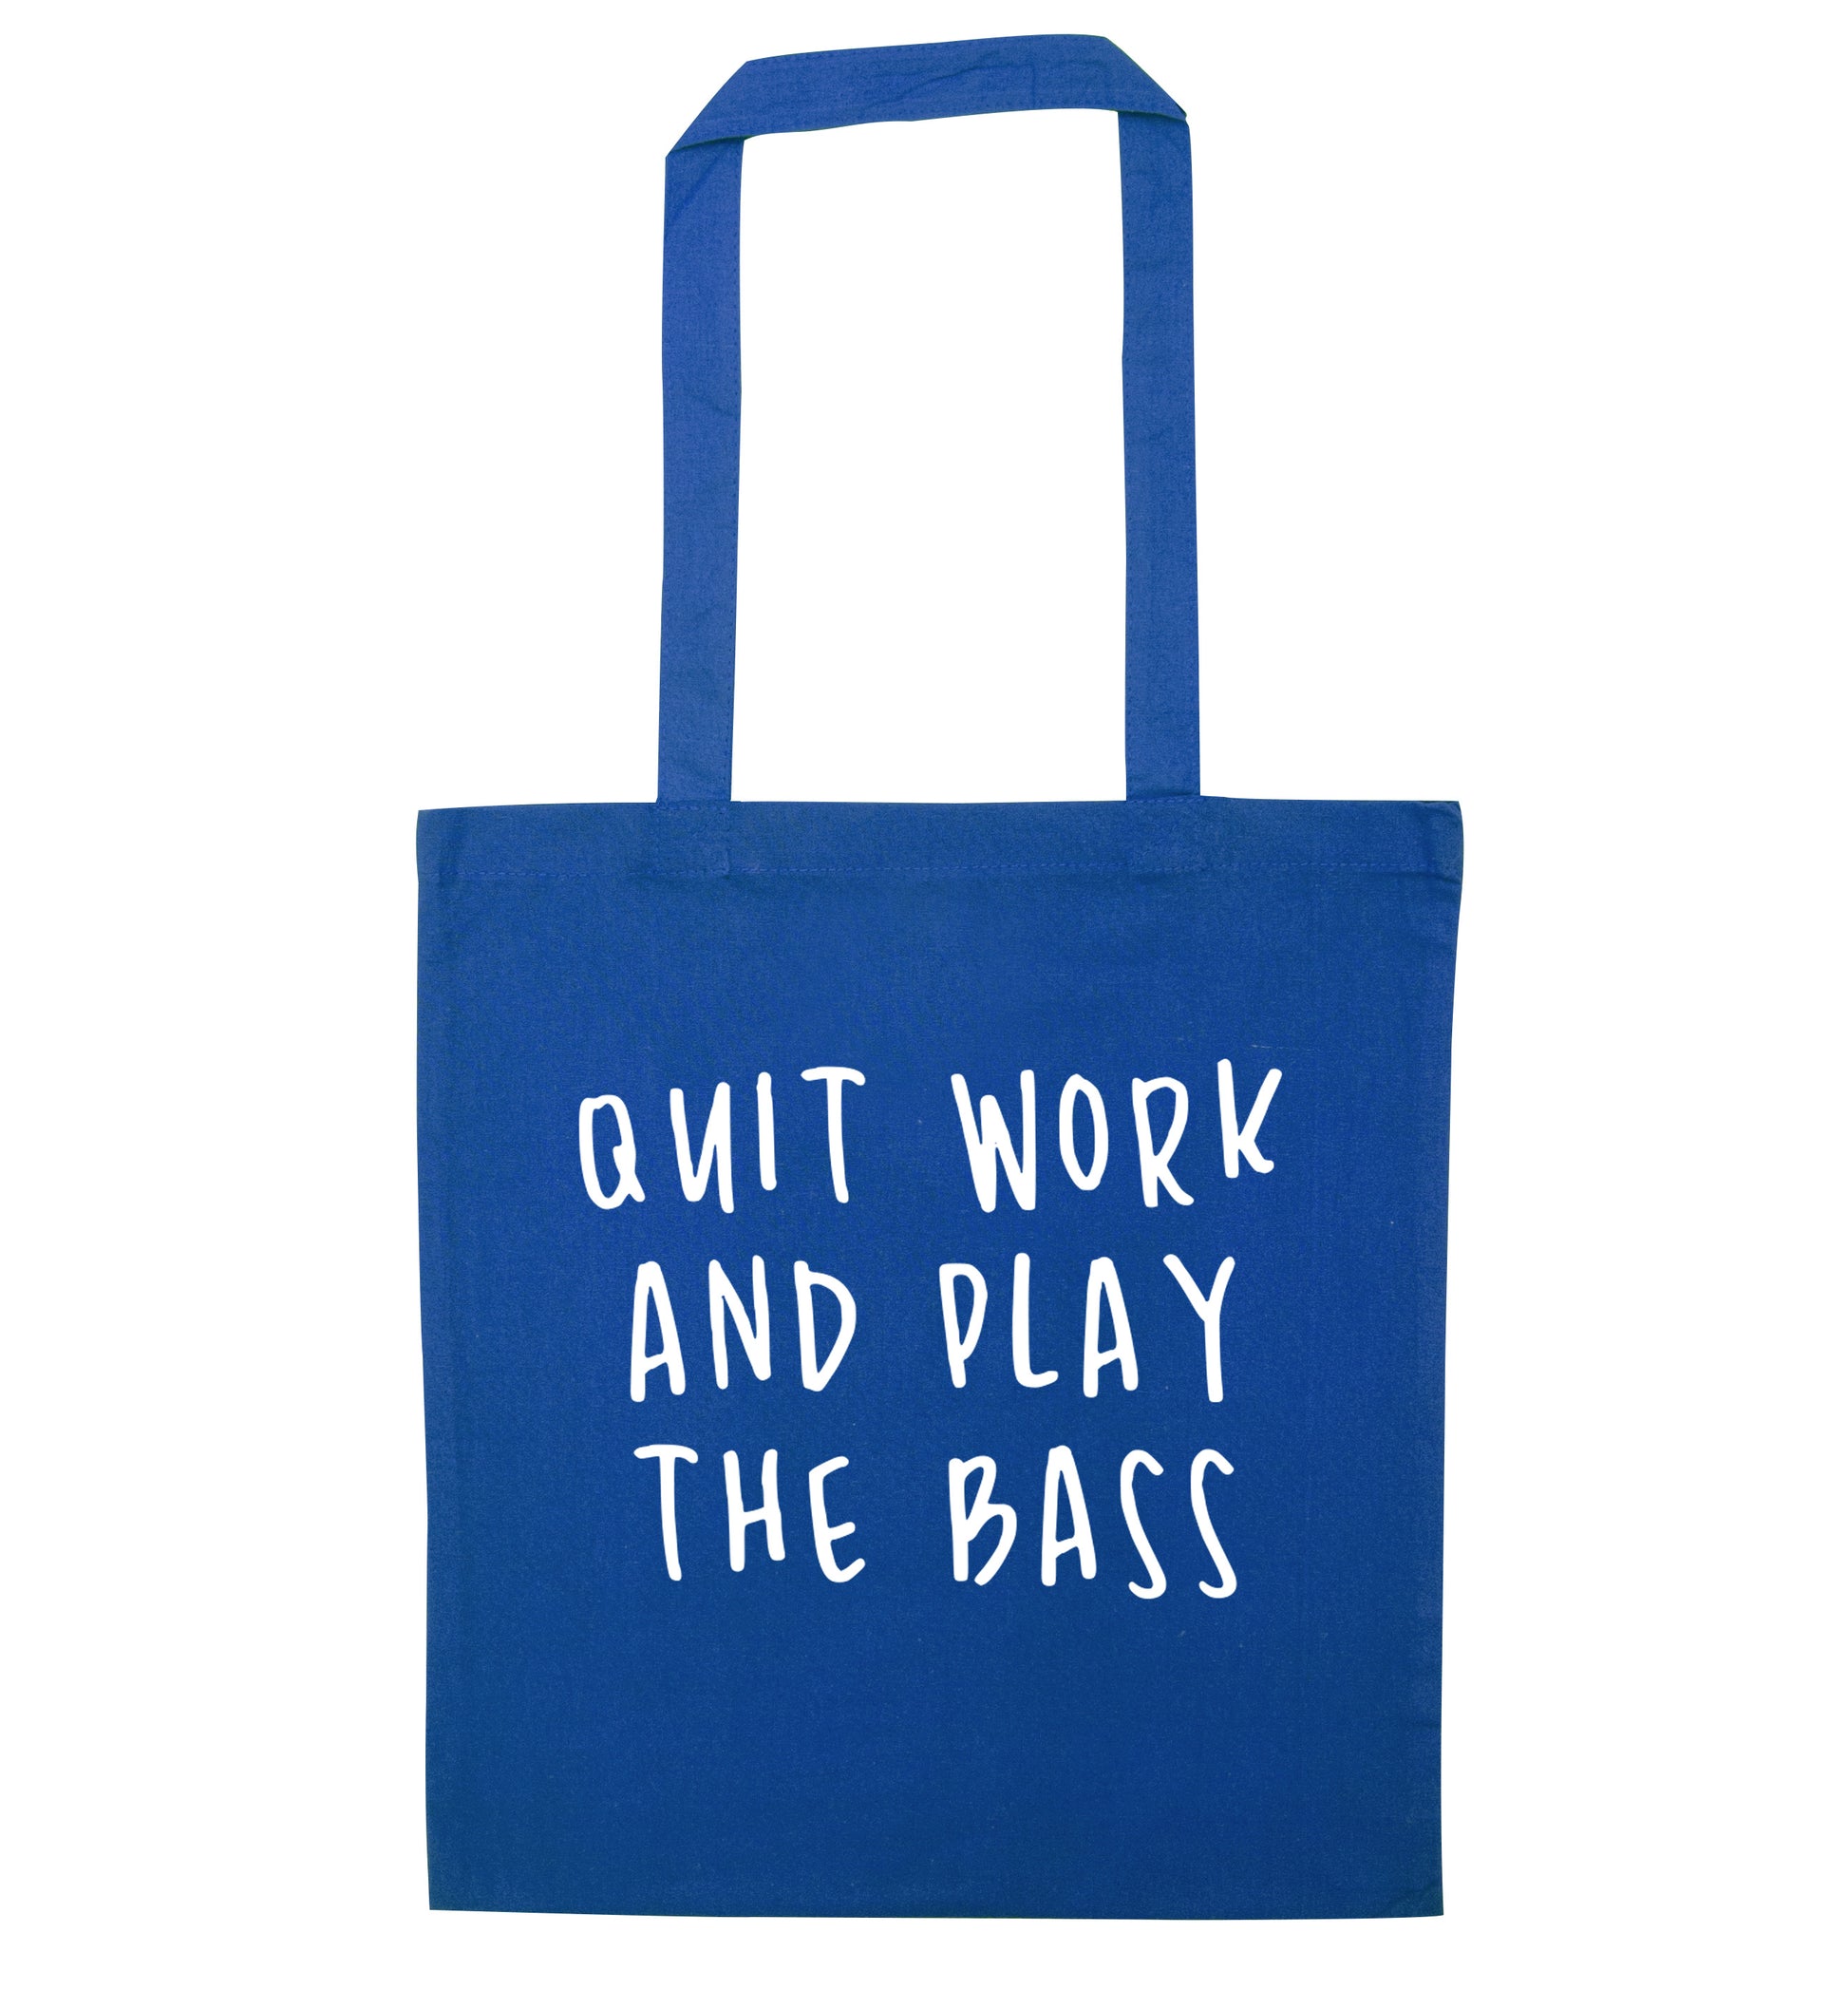 Quit work and play the bass blue tote bag